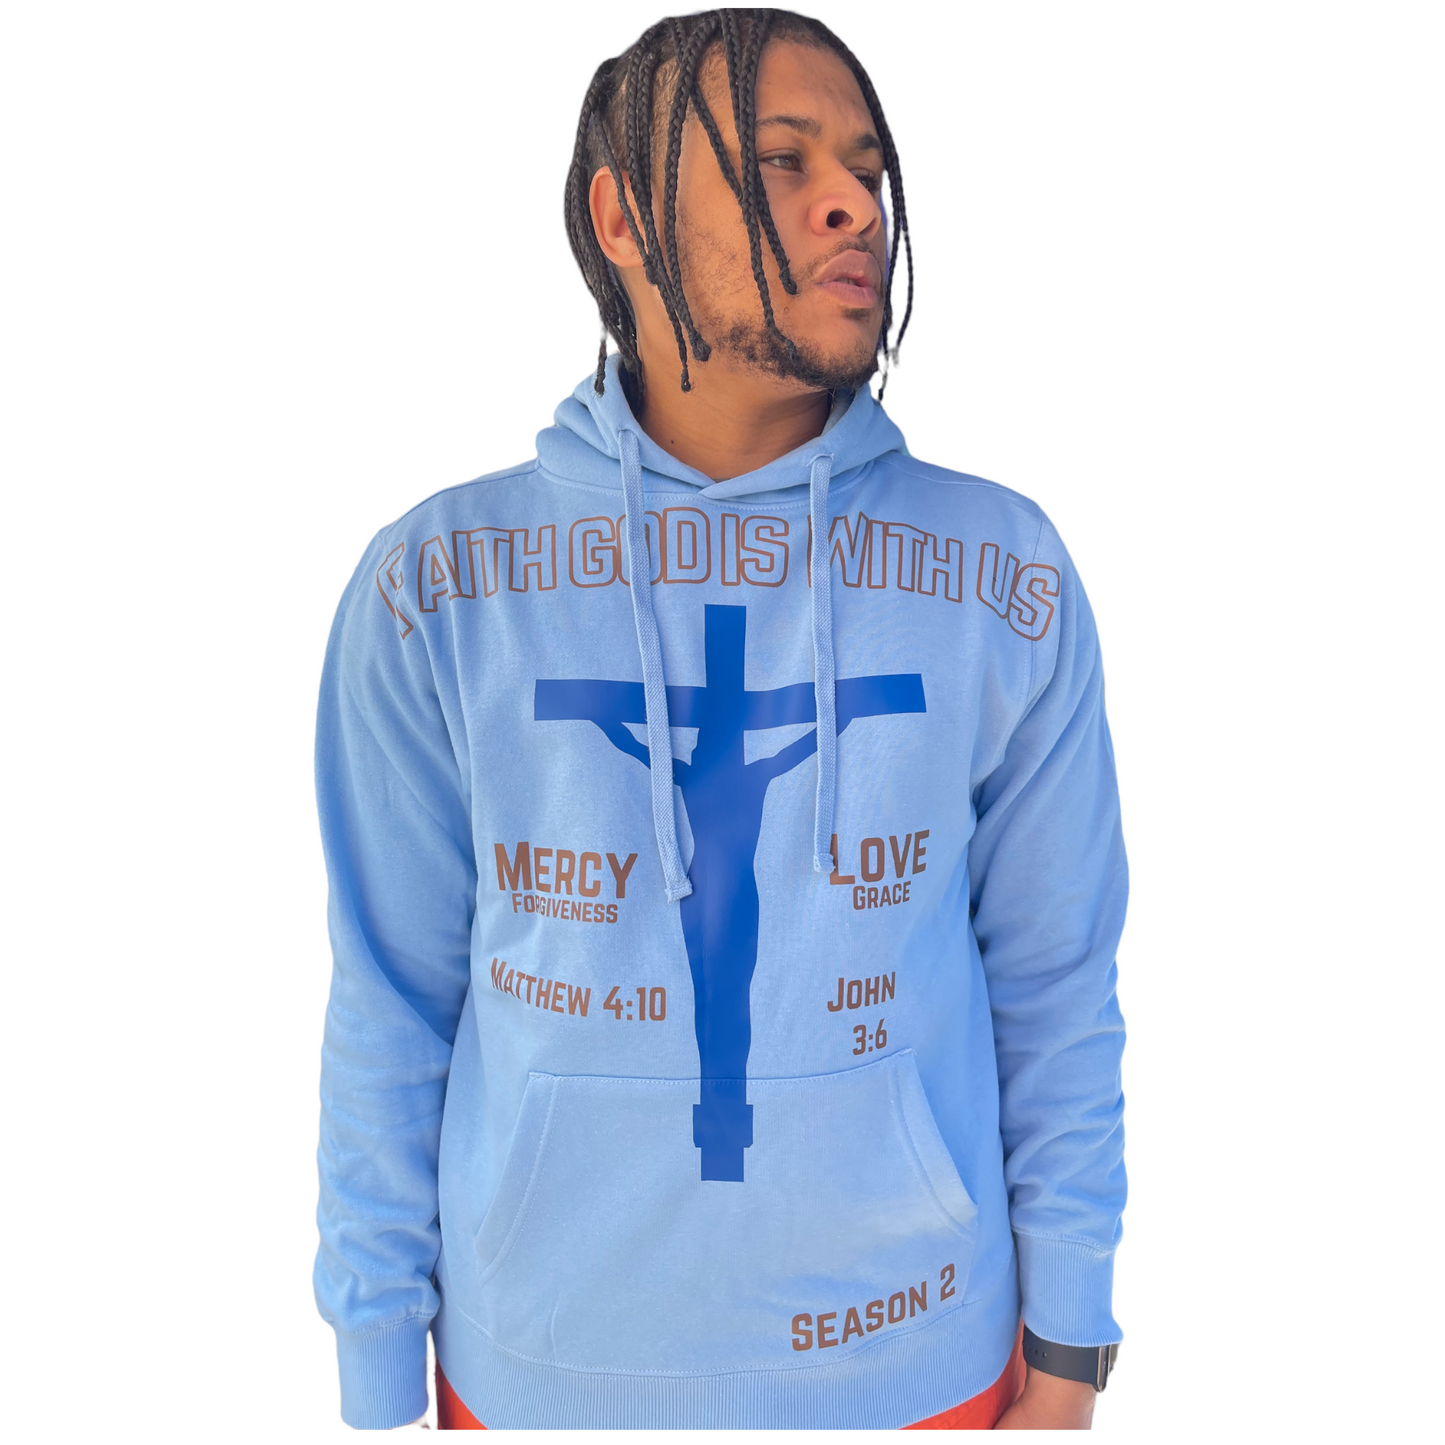 “SON OF ALMIGHTY GOD” Blue Hoodies